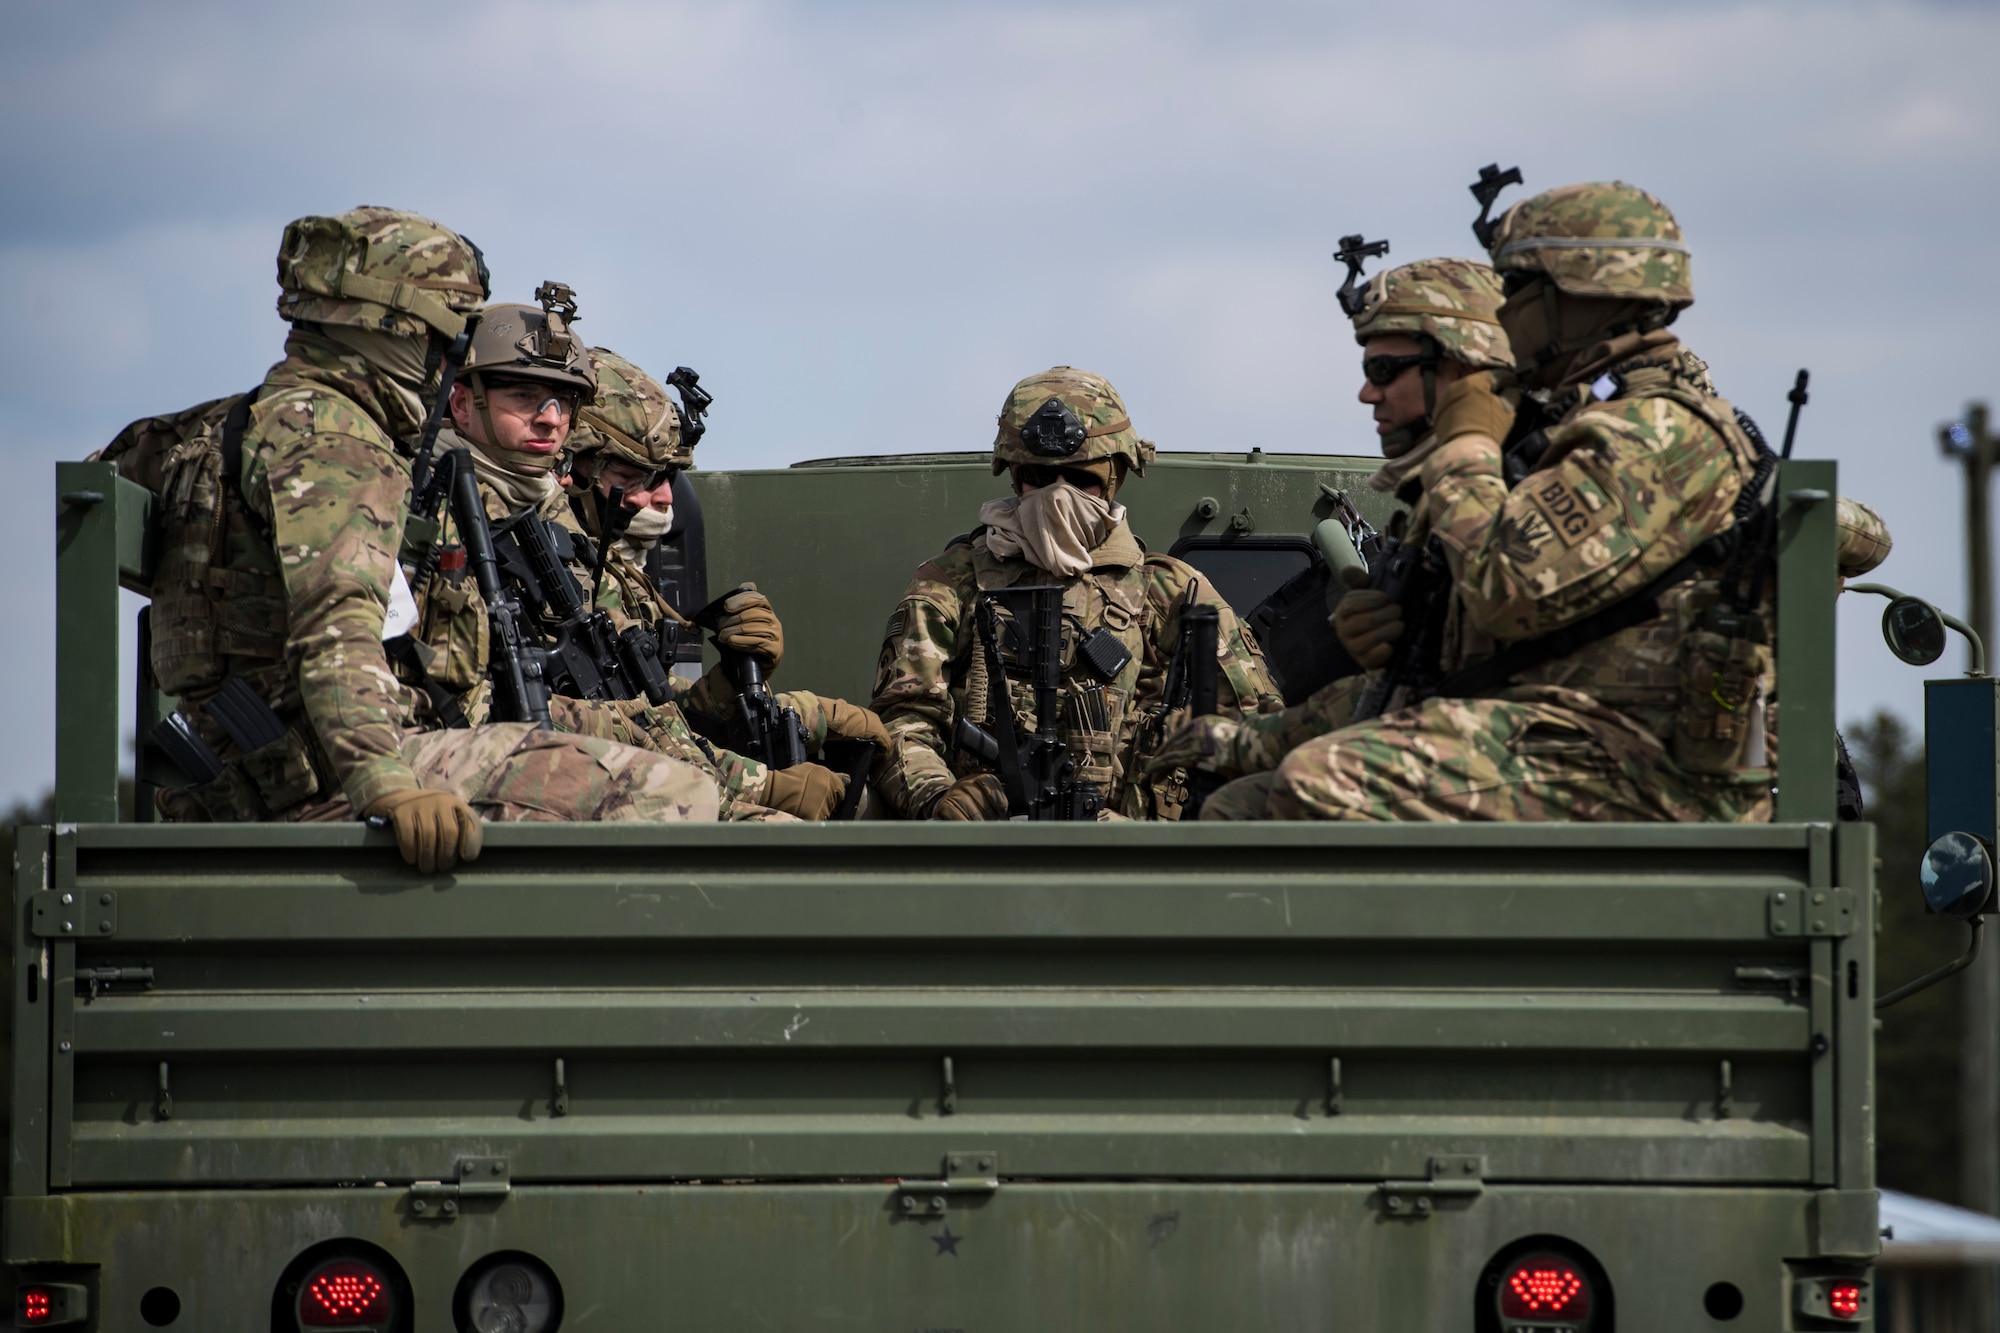 Airmen from the 824th Base Defense Squadron, prepare for a operation outside of their base during a Mission Readiness Exercise, March 13, 2018, at Joint Base McGuire-Dix Lakehurst, N.J. Evaluators tested the 824th BDS from Moody Air Force Base, Ga., and the 105th Security Forces Squadron from Stewart Air National Guard Base, N.Y., to ensure their combat readiness. (U.S. Air Force photo by Senior Airman Janiqua P. Robinson)